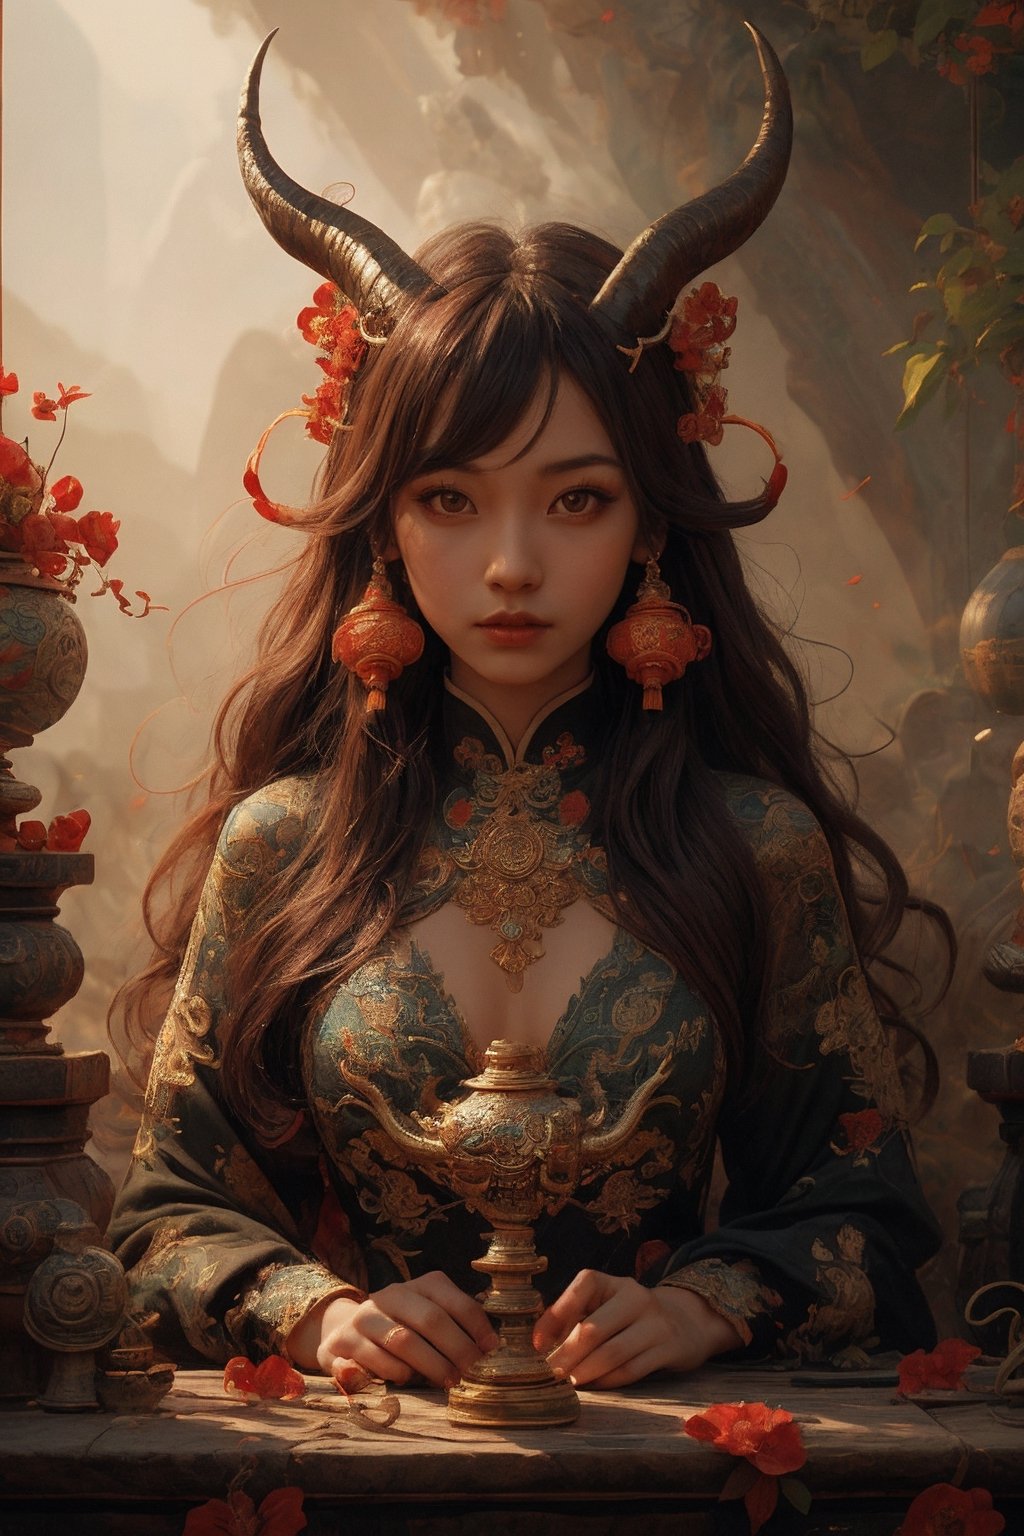 1 girl, (masterful), (long intricate horns:1.2),detailed and intricate, dragonyear, dragon-themed
,Glass Elements, looking_at_viewer,chinese girls,goth person,  sfw,  complex background